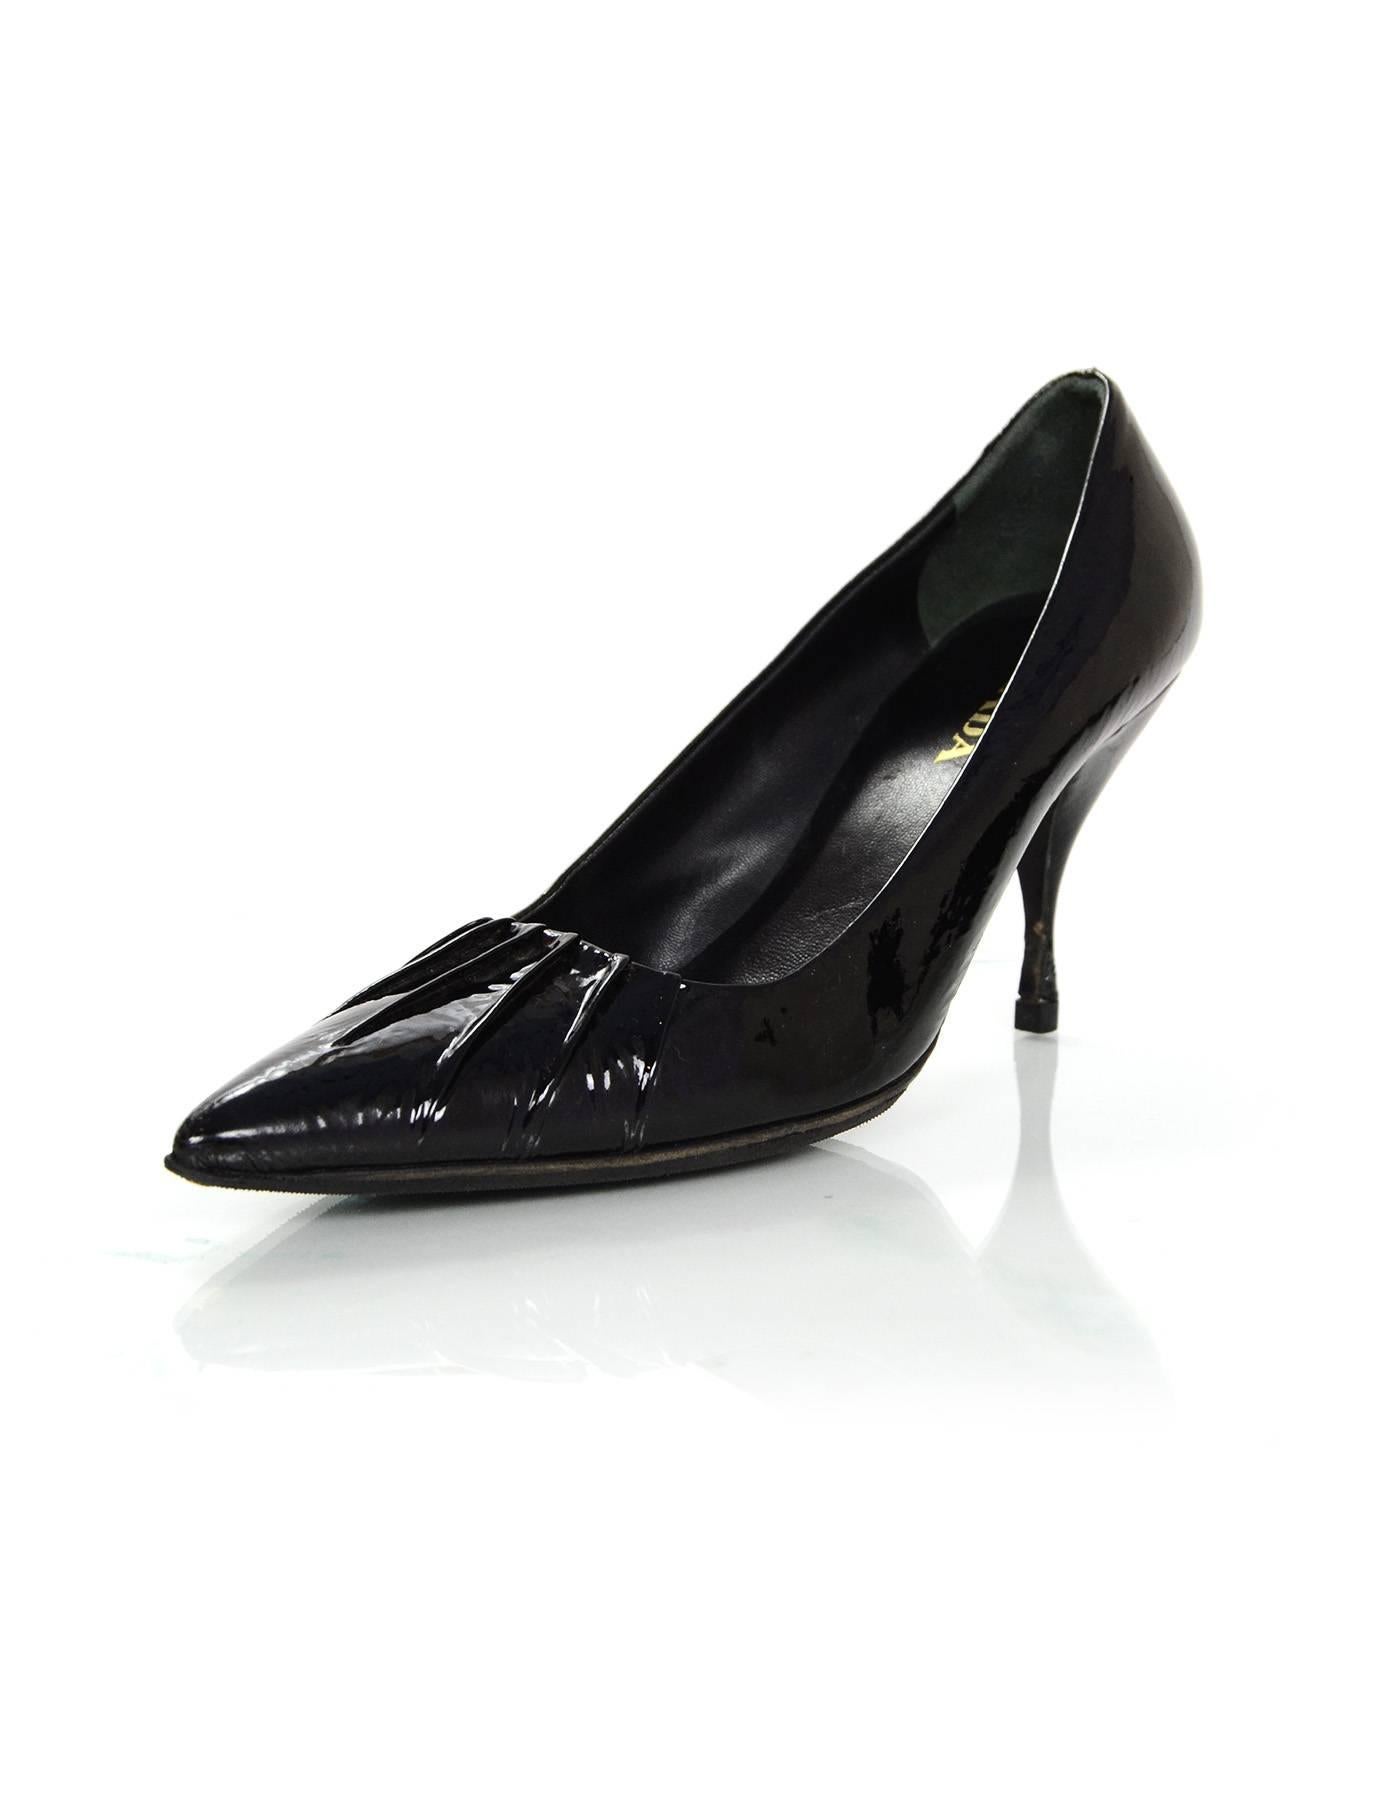 Prada Black Patent Pumps Sz 36.5

Made In: Italy
Color: Black
Materials: Patent leather
Closure/opening: Slide on
Sole Stamp: Prada Made in Italy 36.5 vero cuoio
Overall Condition: Very good pre-owned condition with the exception of wear at patent